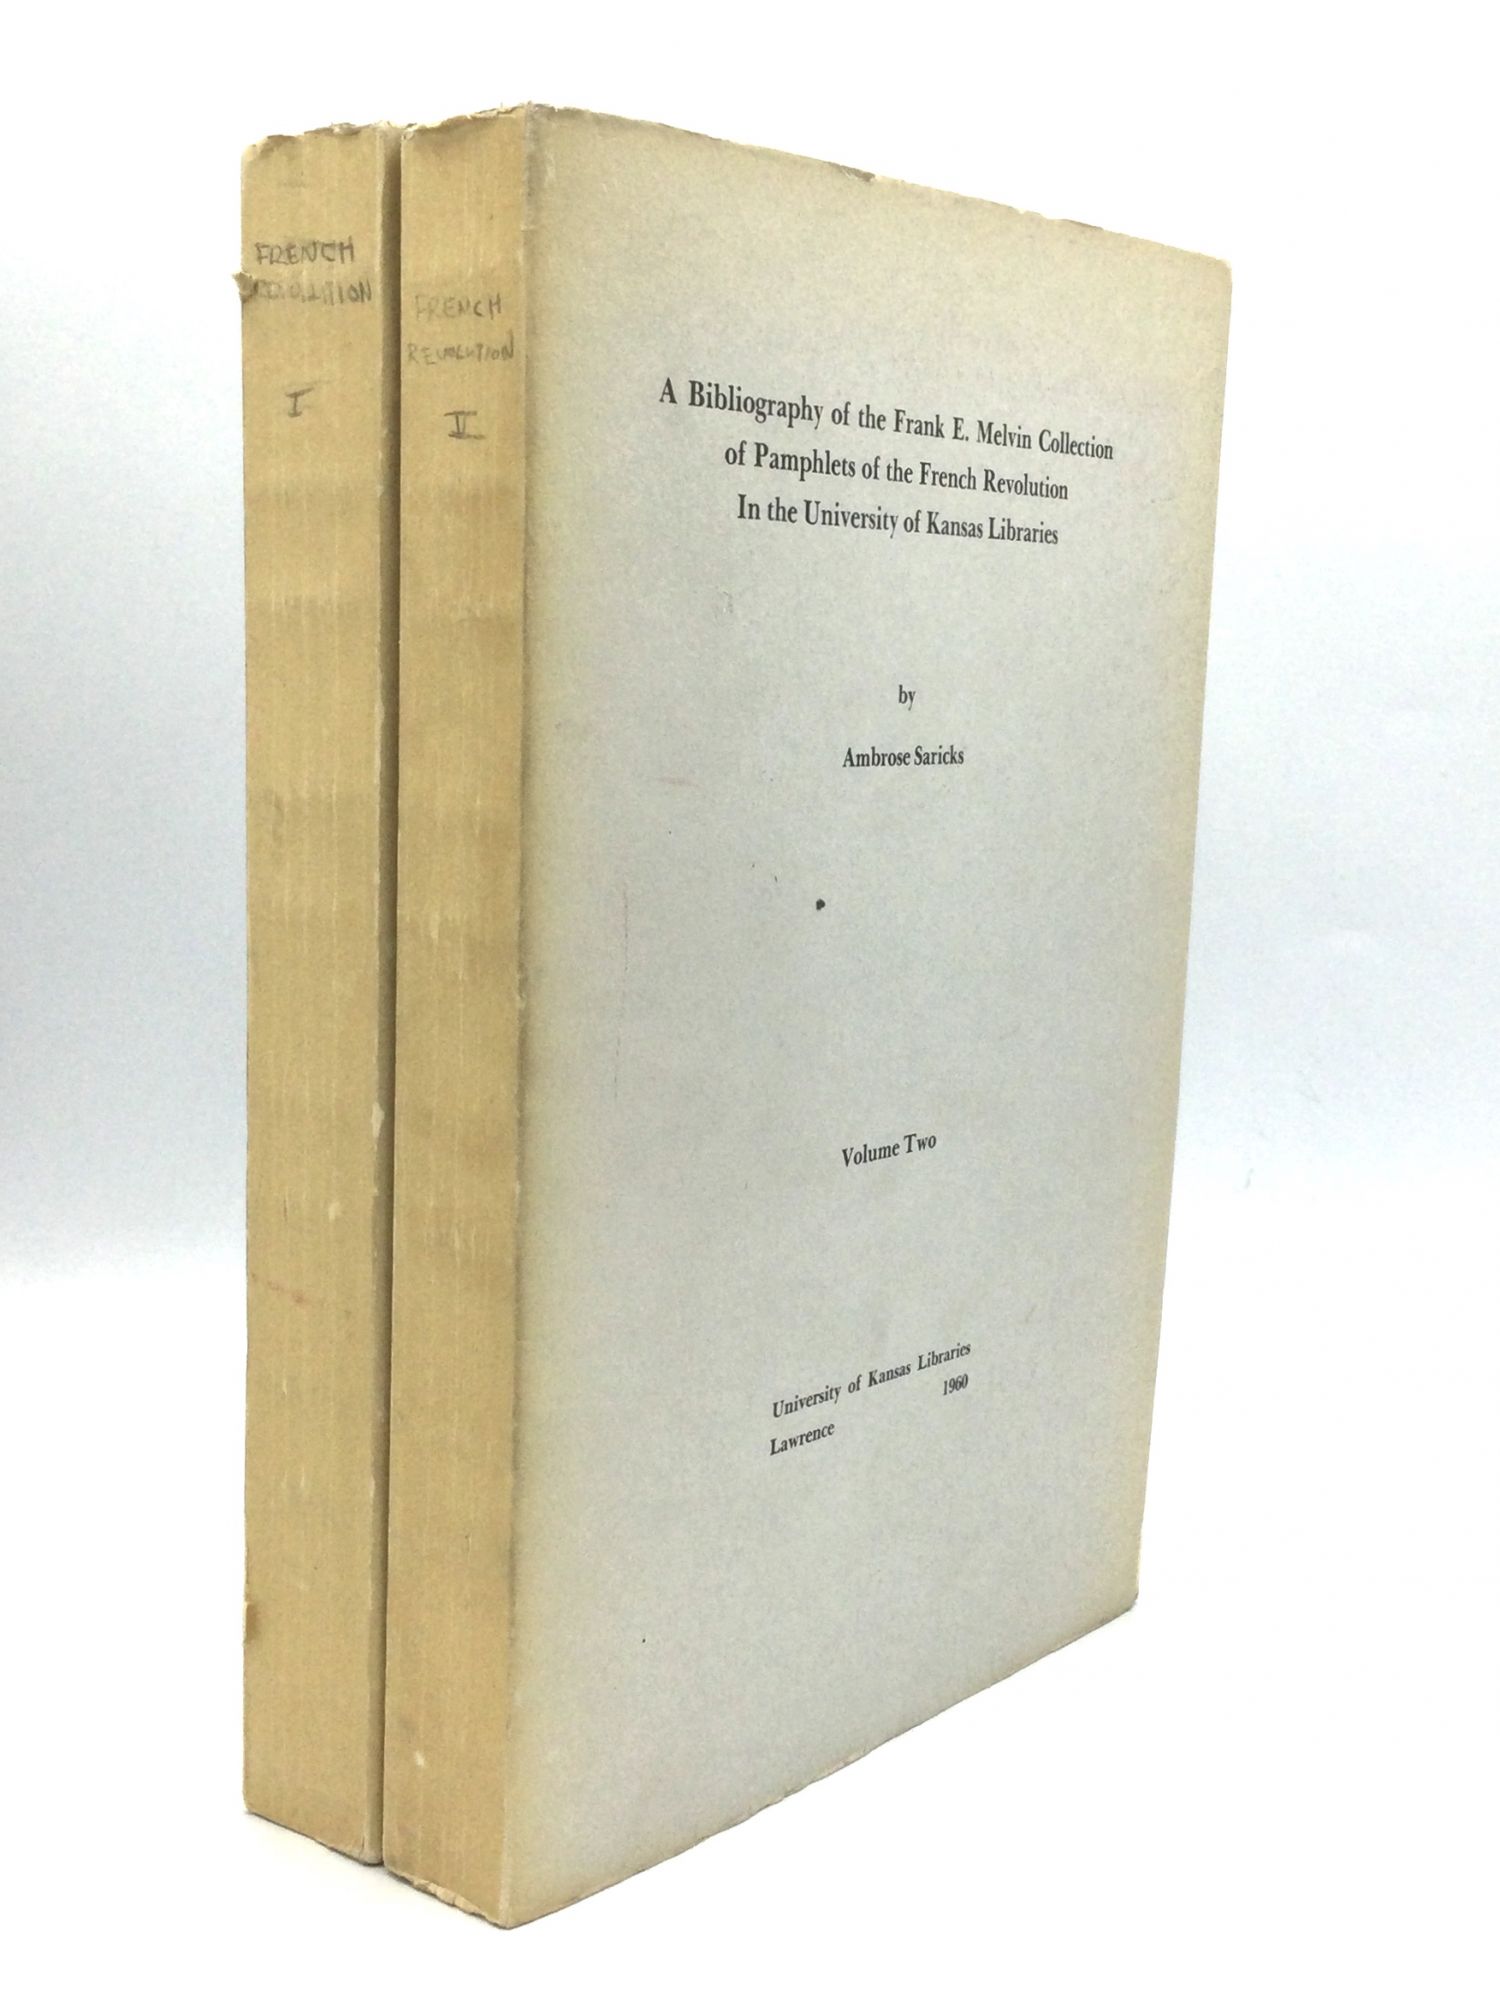 BIBLIOGRAPHY OF THE FRANK E. MELVIN COLLECTION PAMPHLETS OF THE FRENCH REVOLUTION IN THE UNIVERSITY OF KANSAS LIBRARIES by Saricks, Ambrose: Very Good Hardcover (1960) First edition. | johnson rare